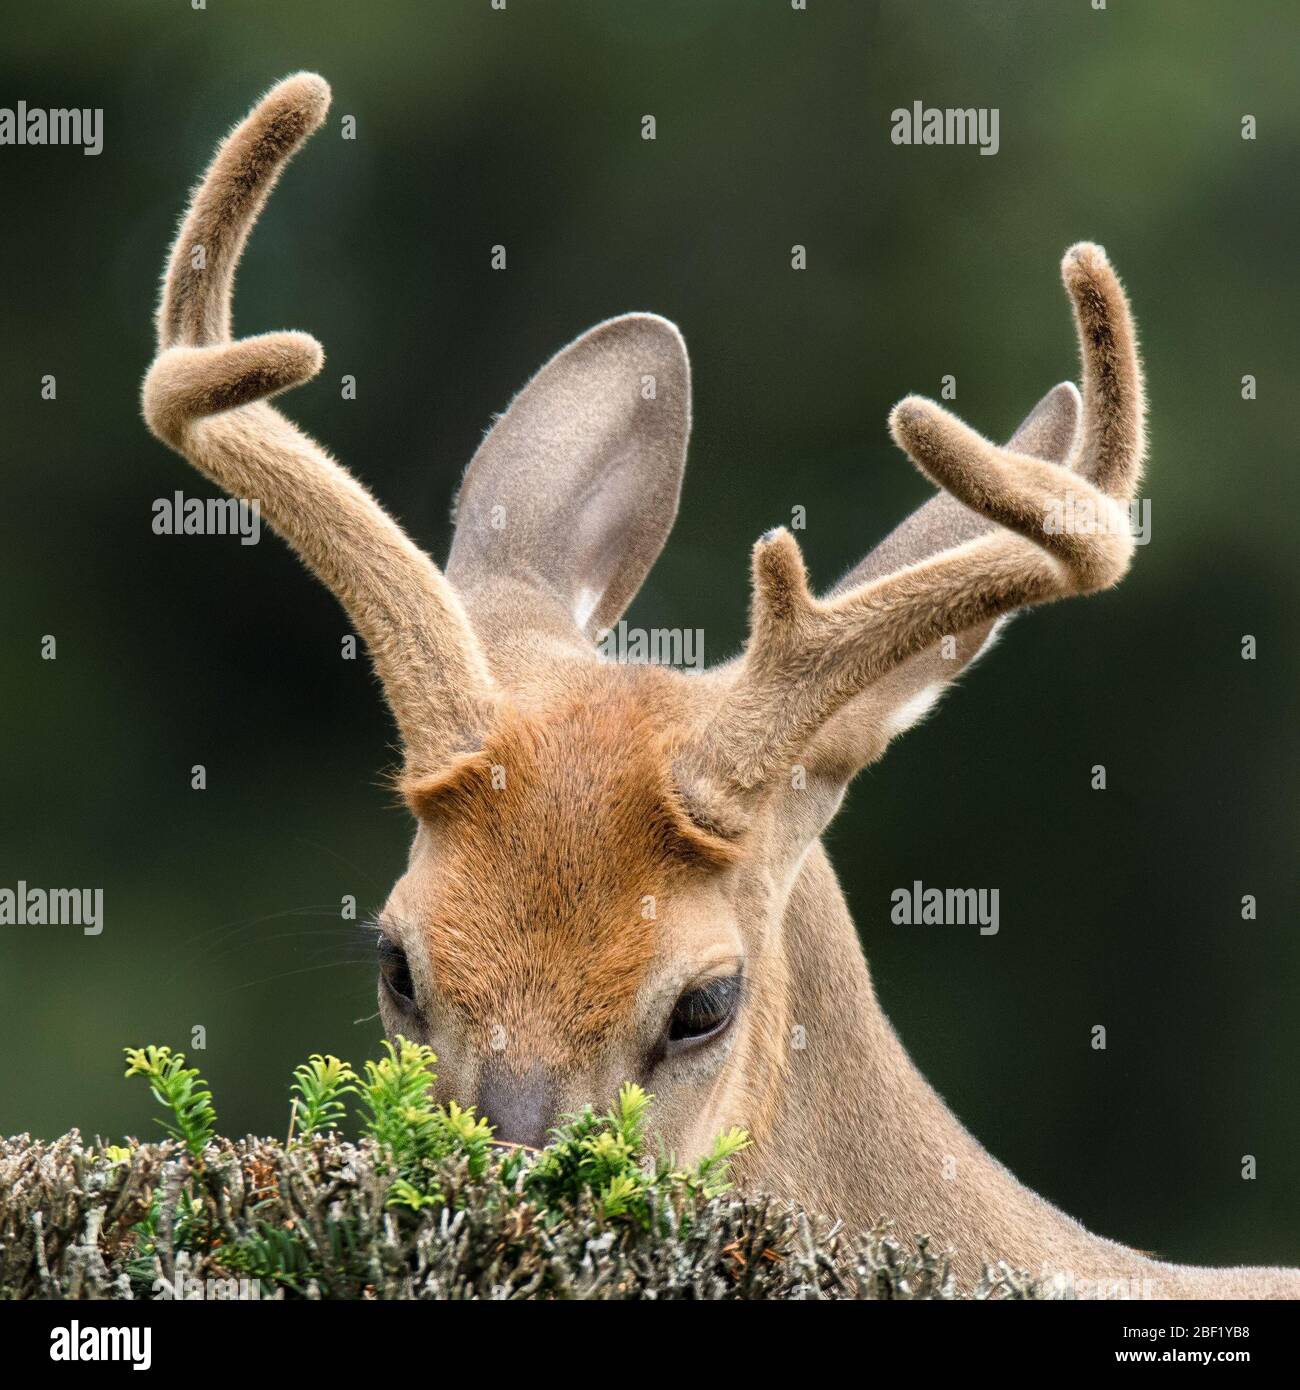 One closeup of deer head with antlers, peeking out of bushes with shyness. Stock Photo